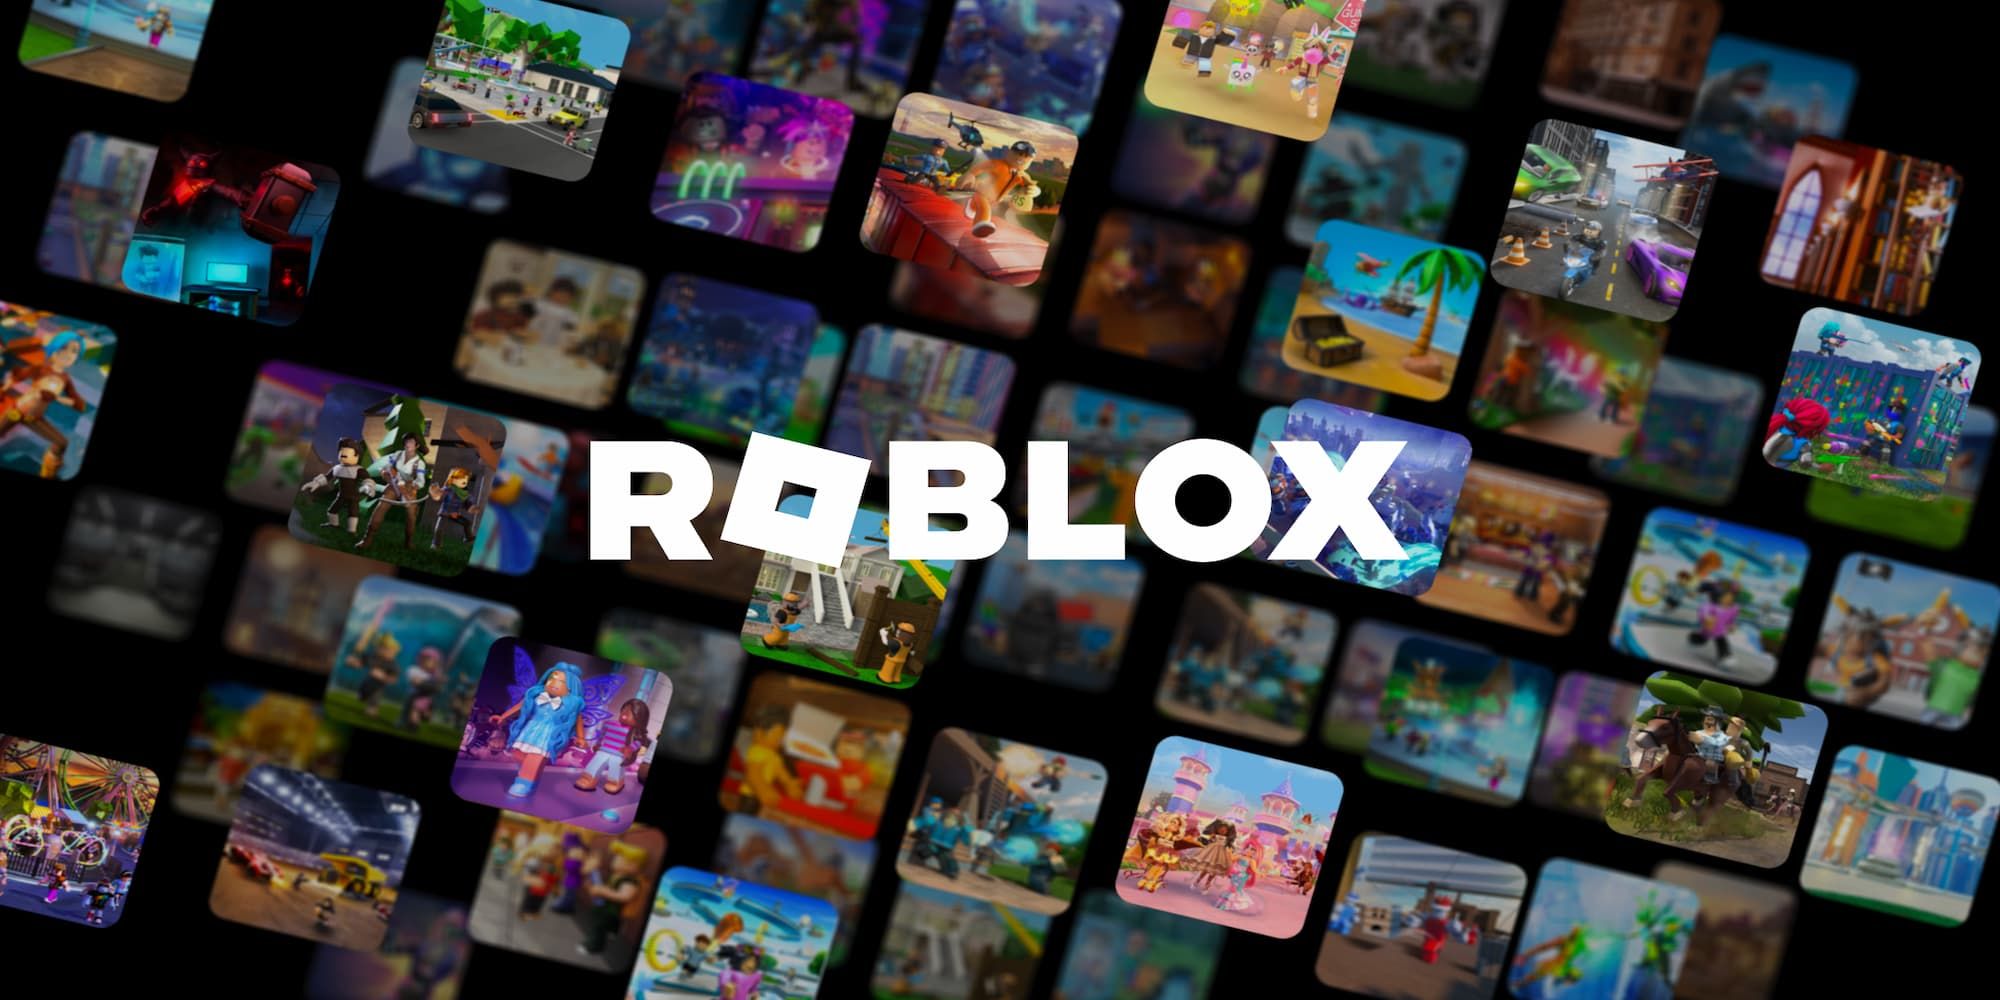 How to get voice chat on Roblox?